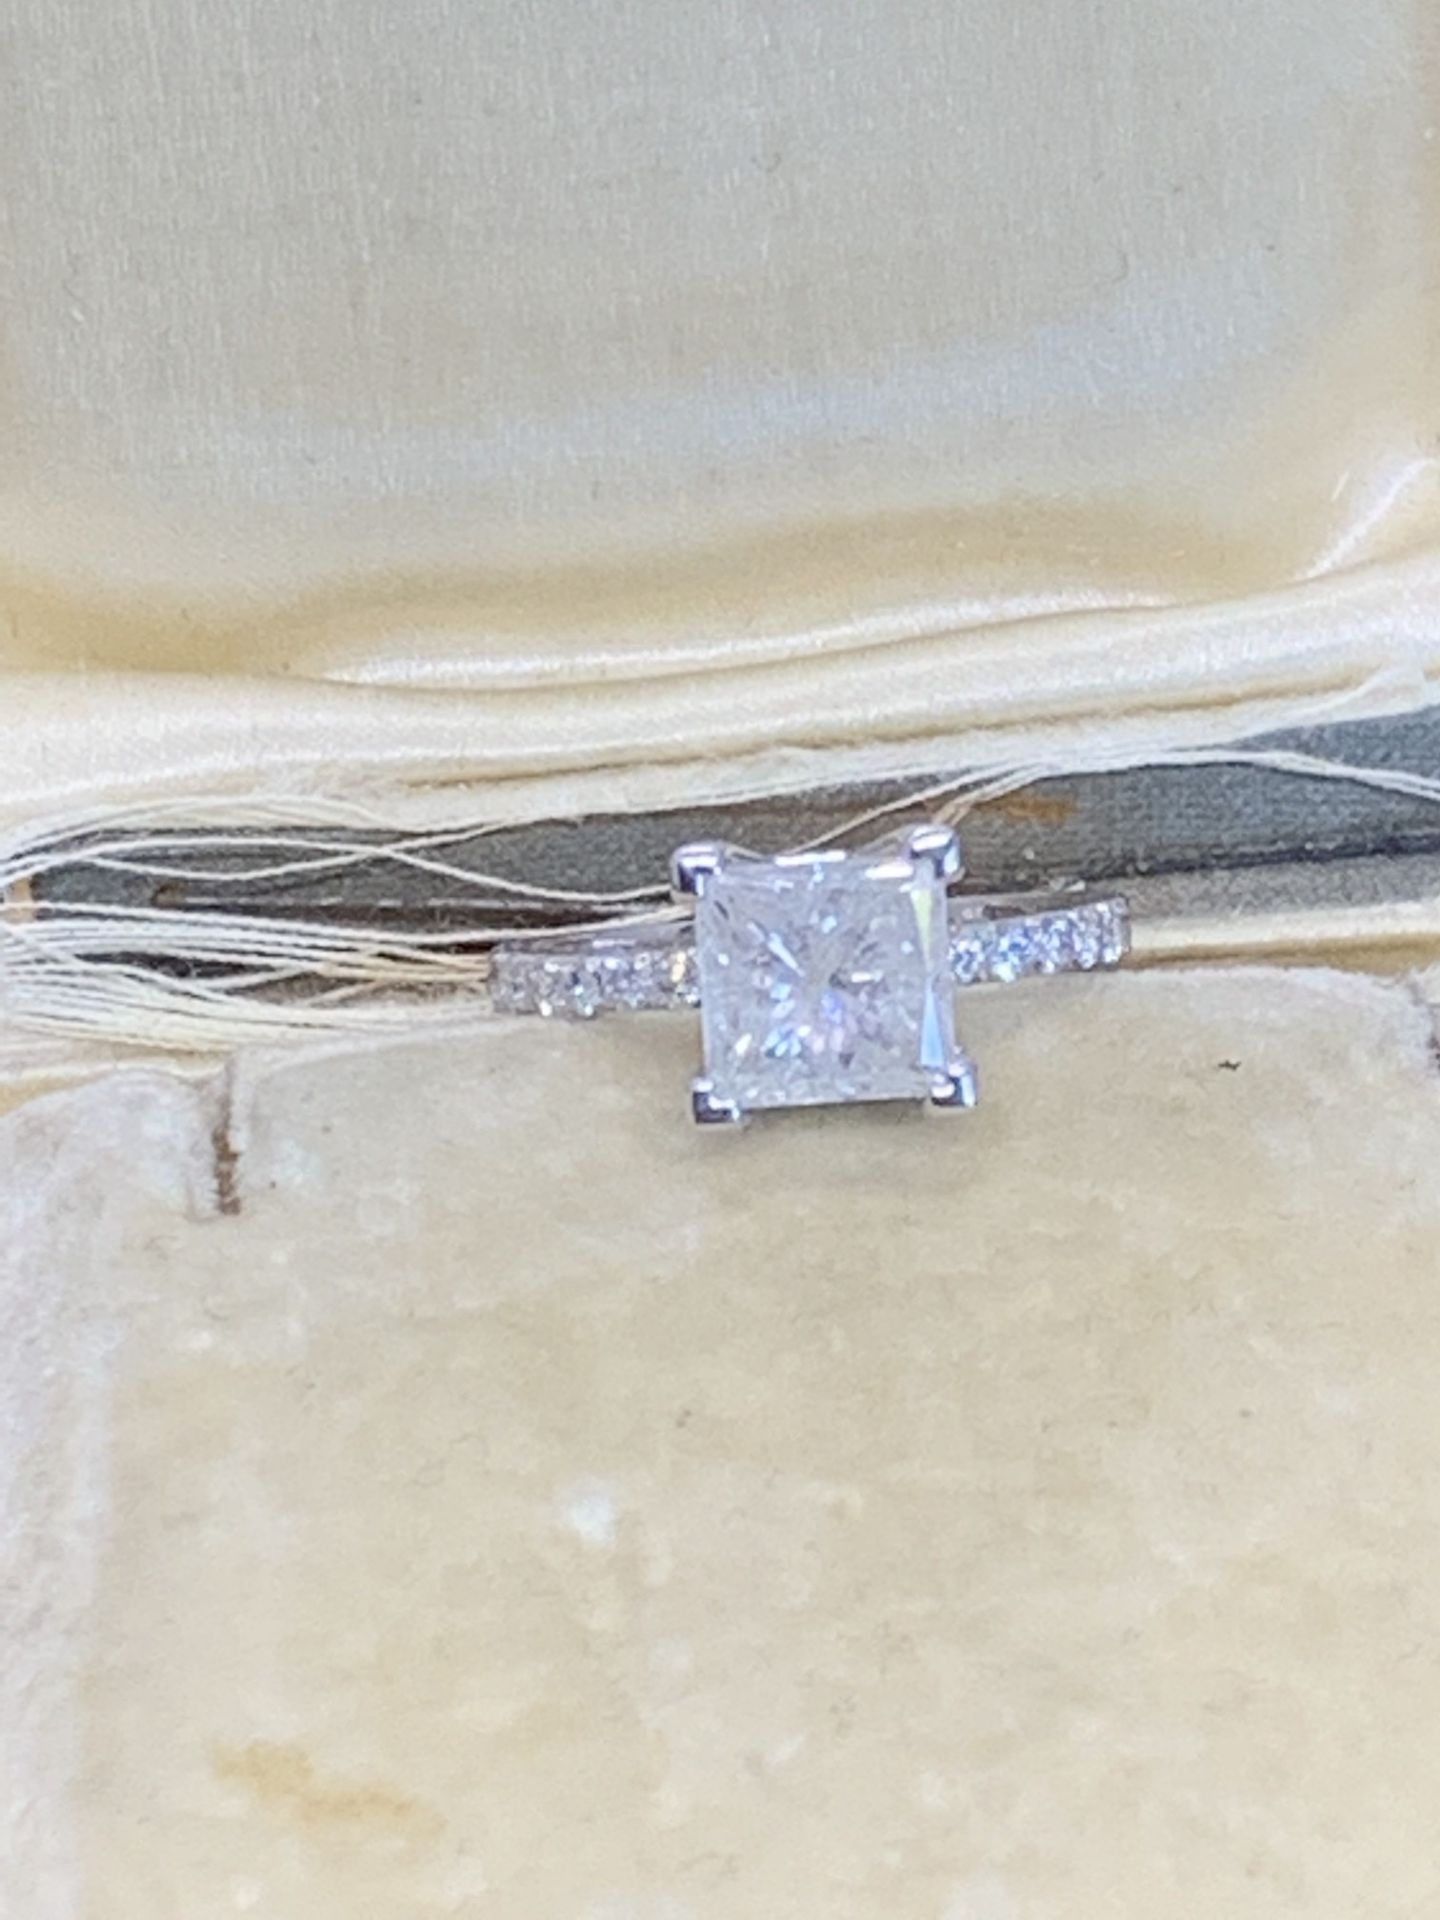 2.82ct PRINCESS CUT DIAMOND SOLITAIRE RING SET IN WHITE METAL TESTED AS WHITE GOLD - Image 2 of 4